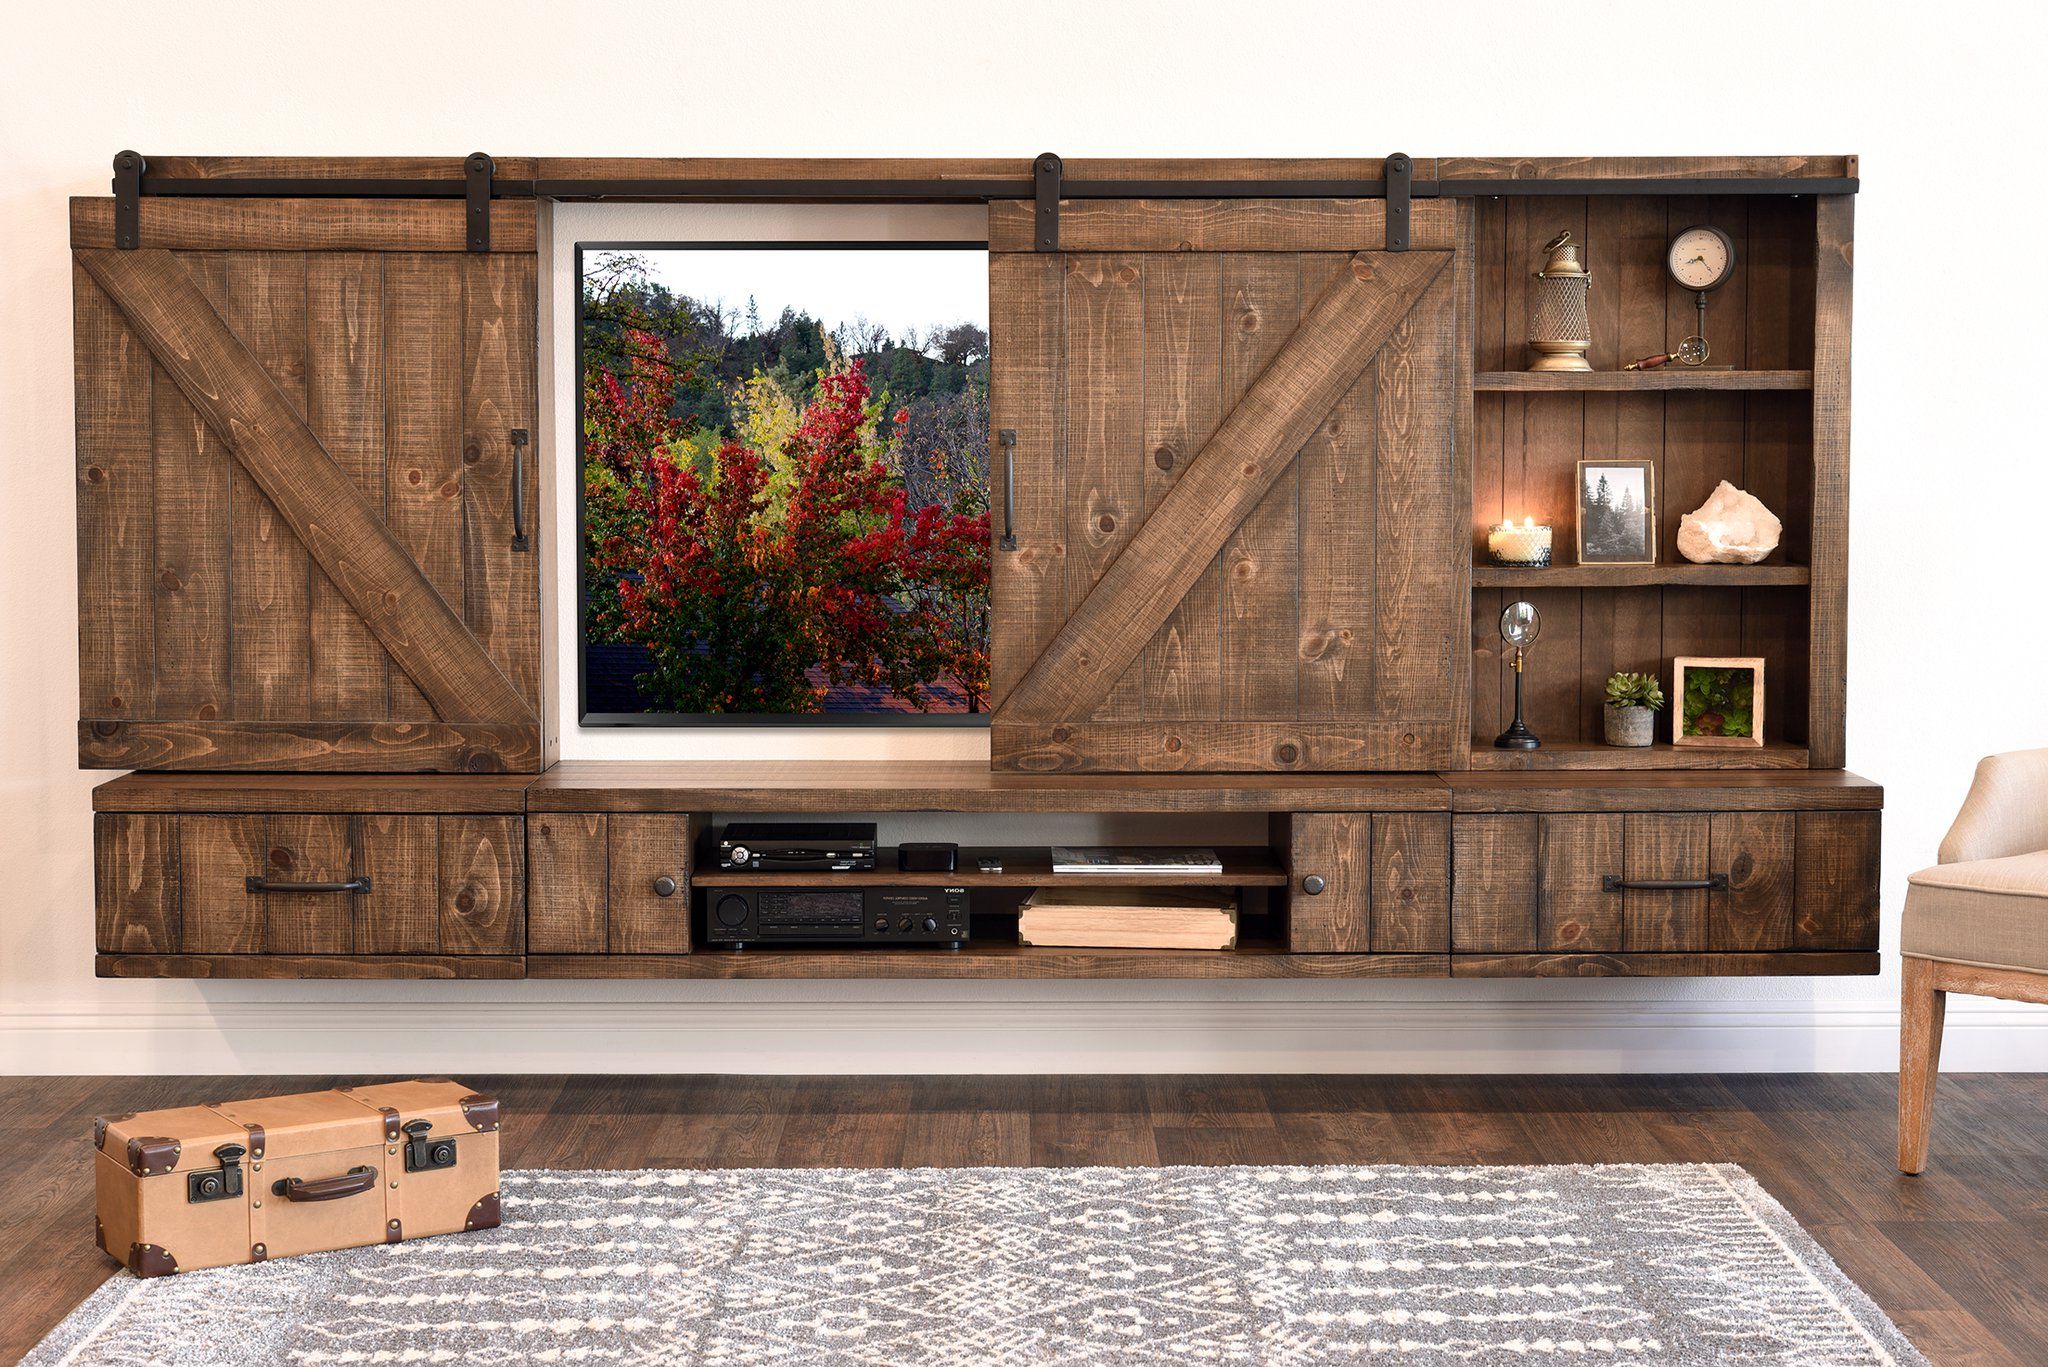 Wall Mounted Tv Cabinets For Flat Screens With Doors Intended For Popular Flat Screen Tv Wall Cabinet Furniture What To Put Under Mounted With (View 5 of 20)